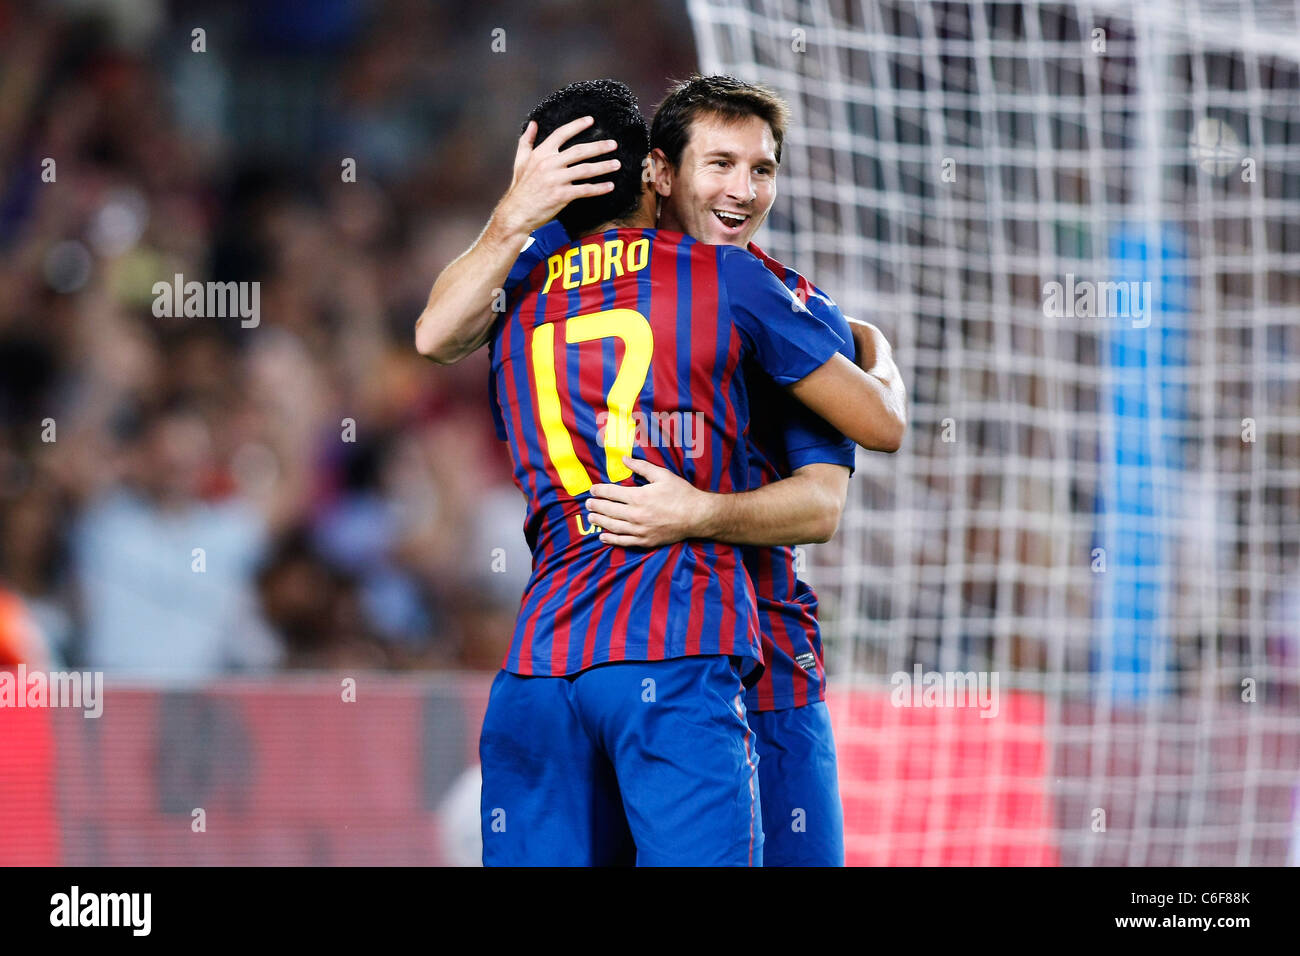 Pedro Rodriguez and Lionel Messi (Barcelona) celebrating their point for  Trofeo Joan Gamper match between FC Barcelona 5-0 Napol Stock Photo - Alamy